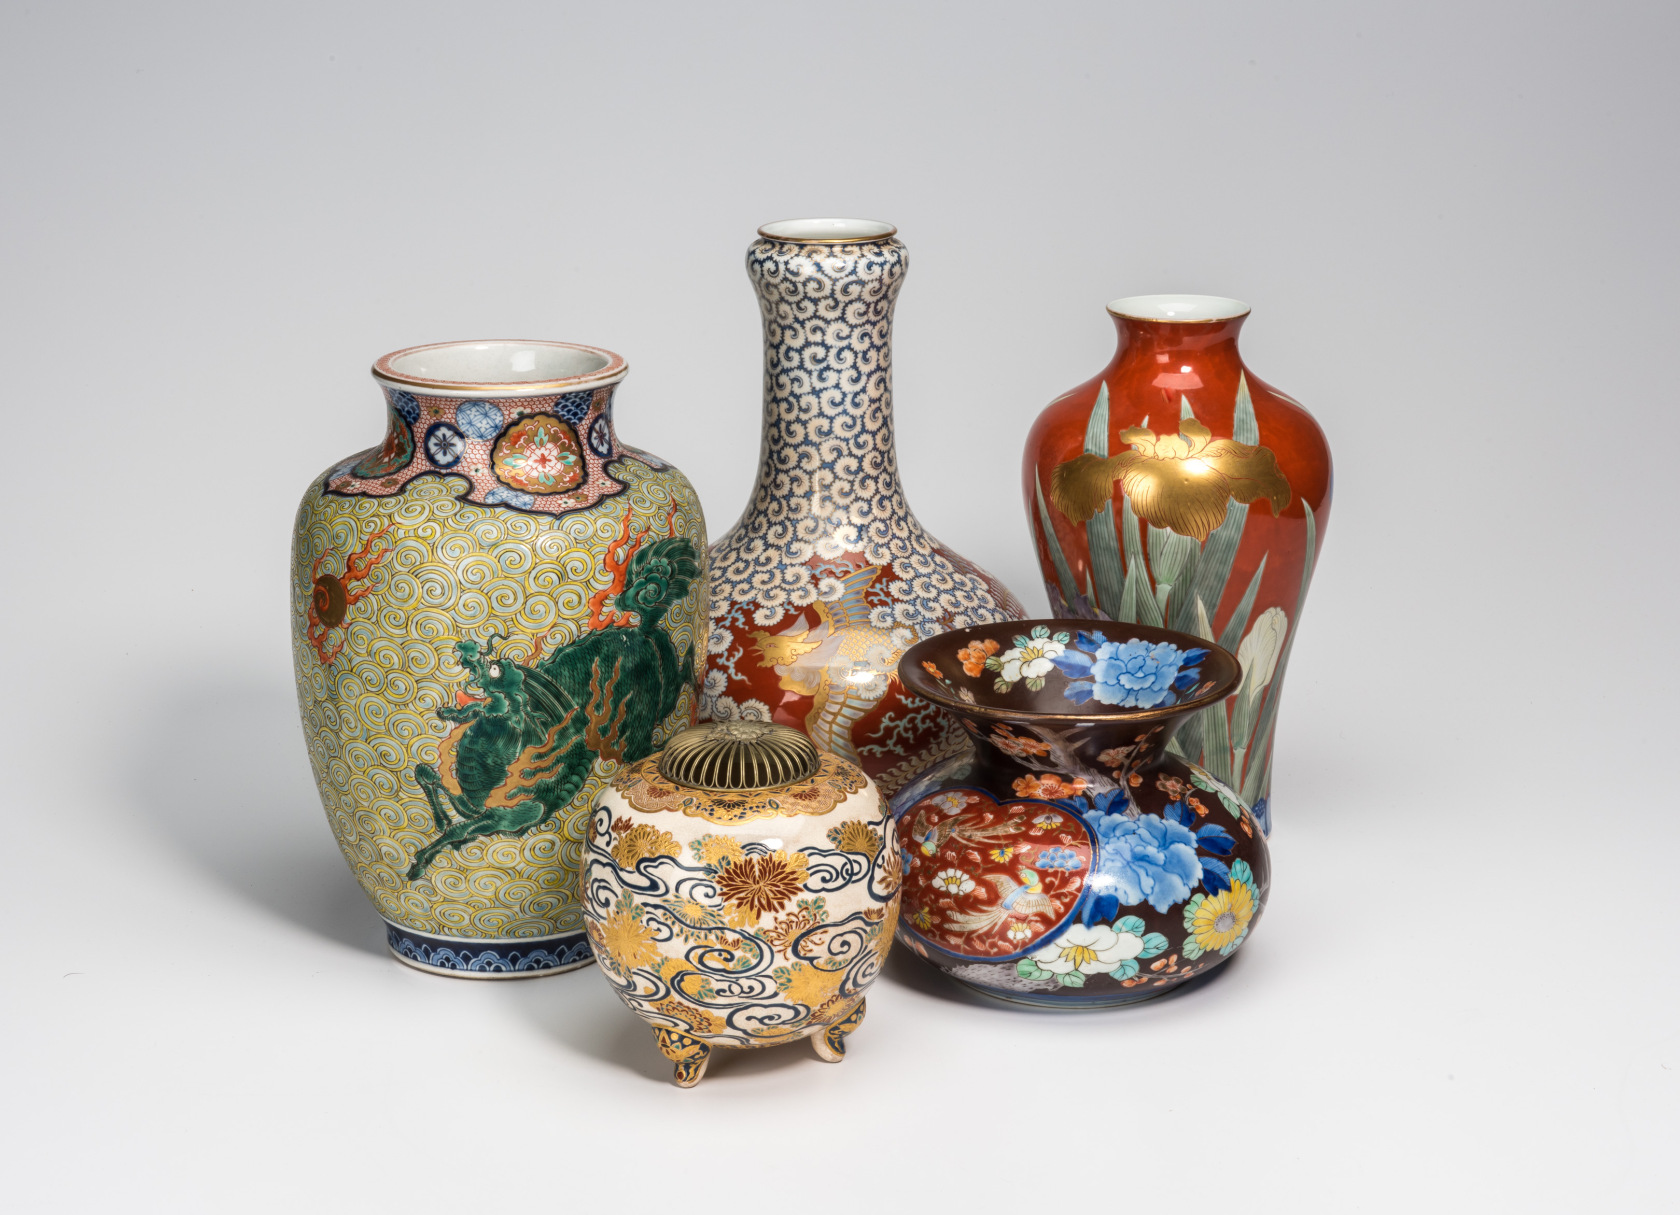 A grouping of five ornately-decorated vases in bright colors.